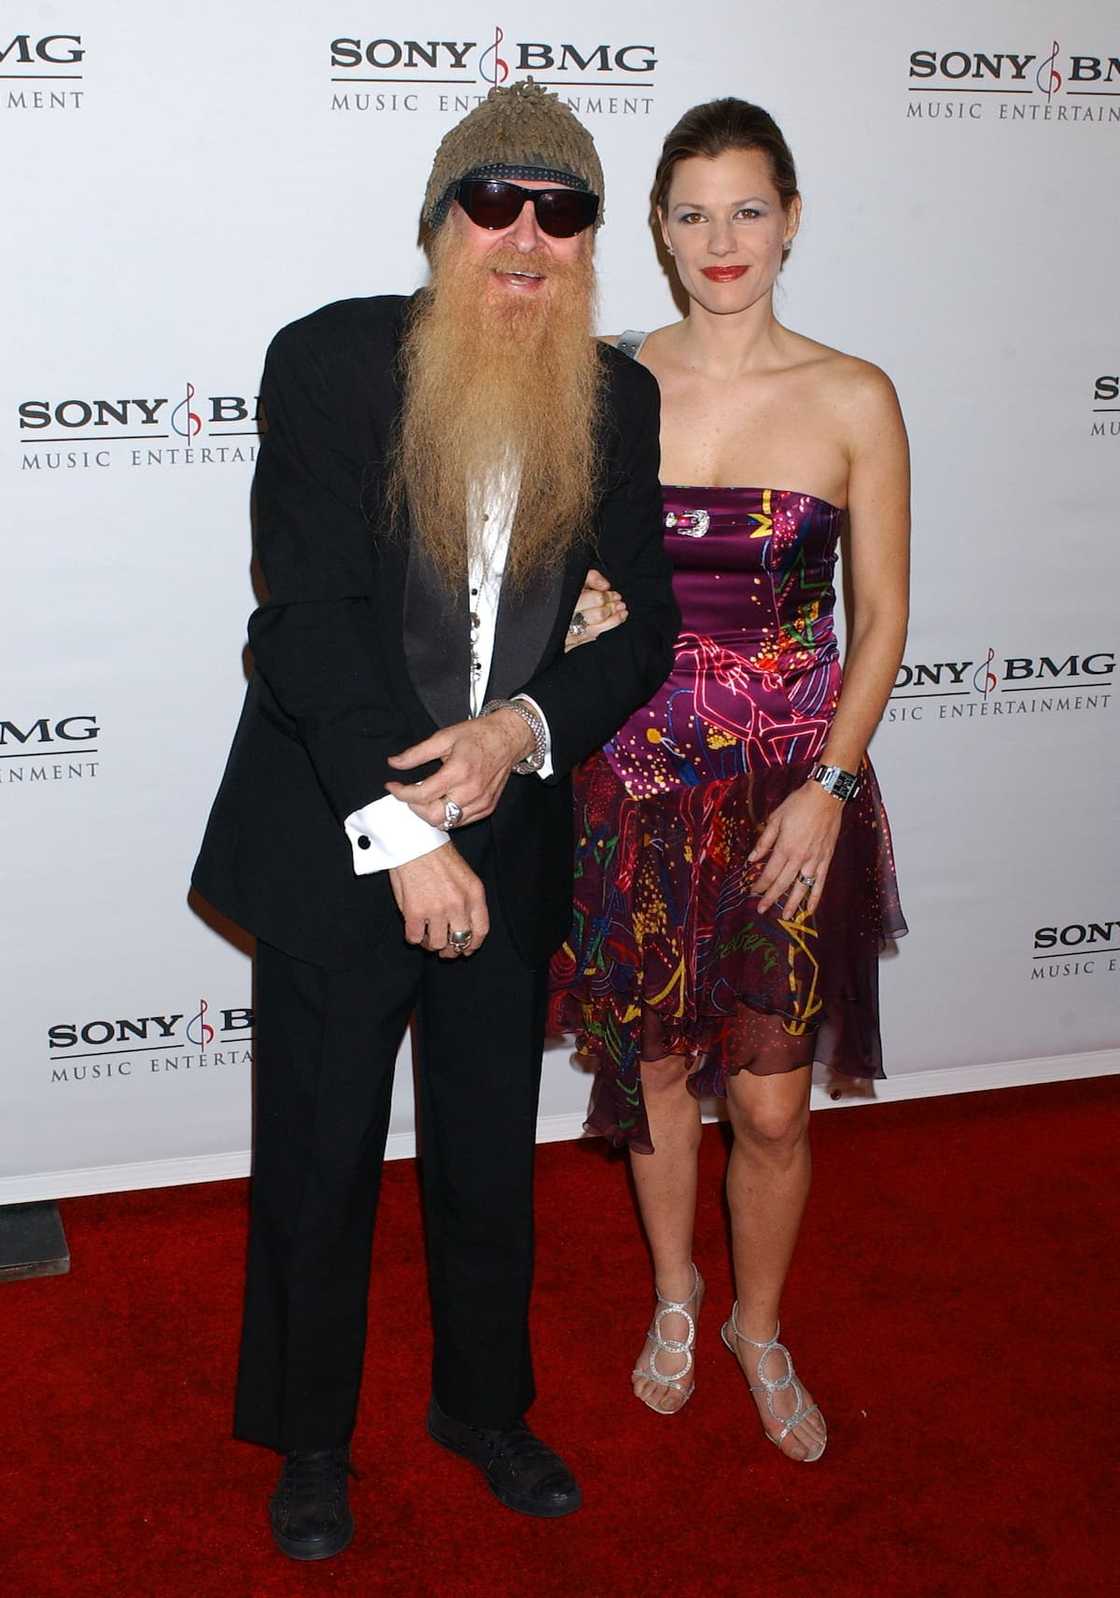 Billy Gibbons's wife